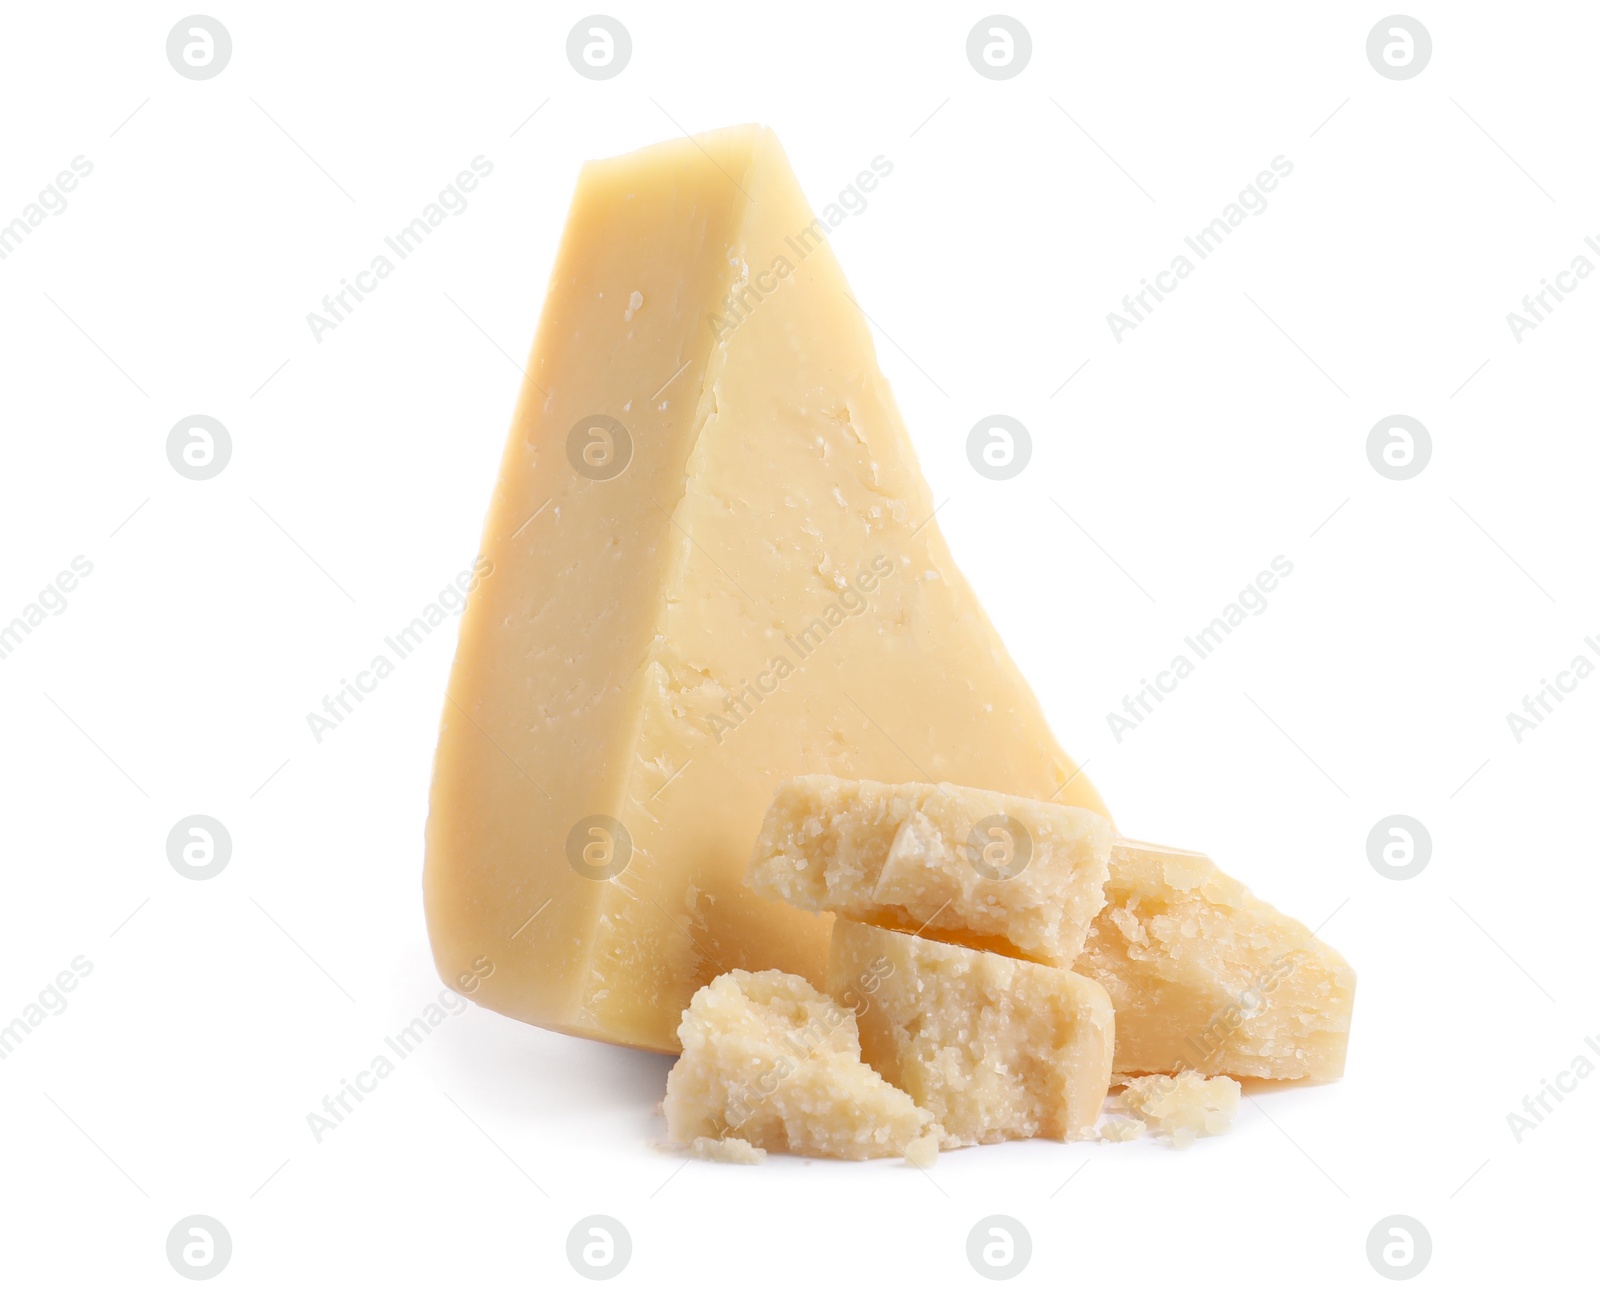 Photo of Pieces of delicious parmesan cheese on white background